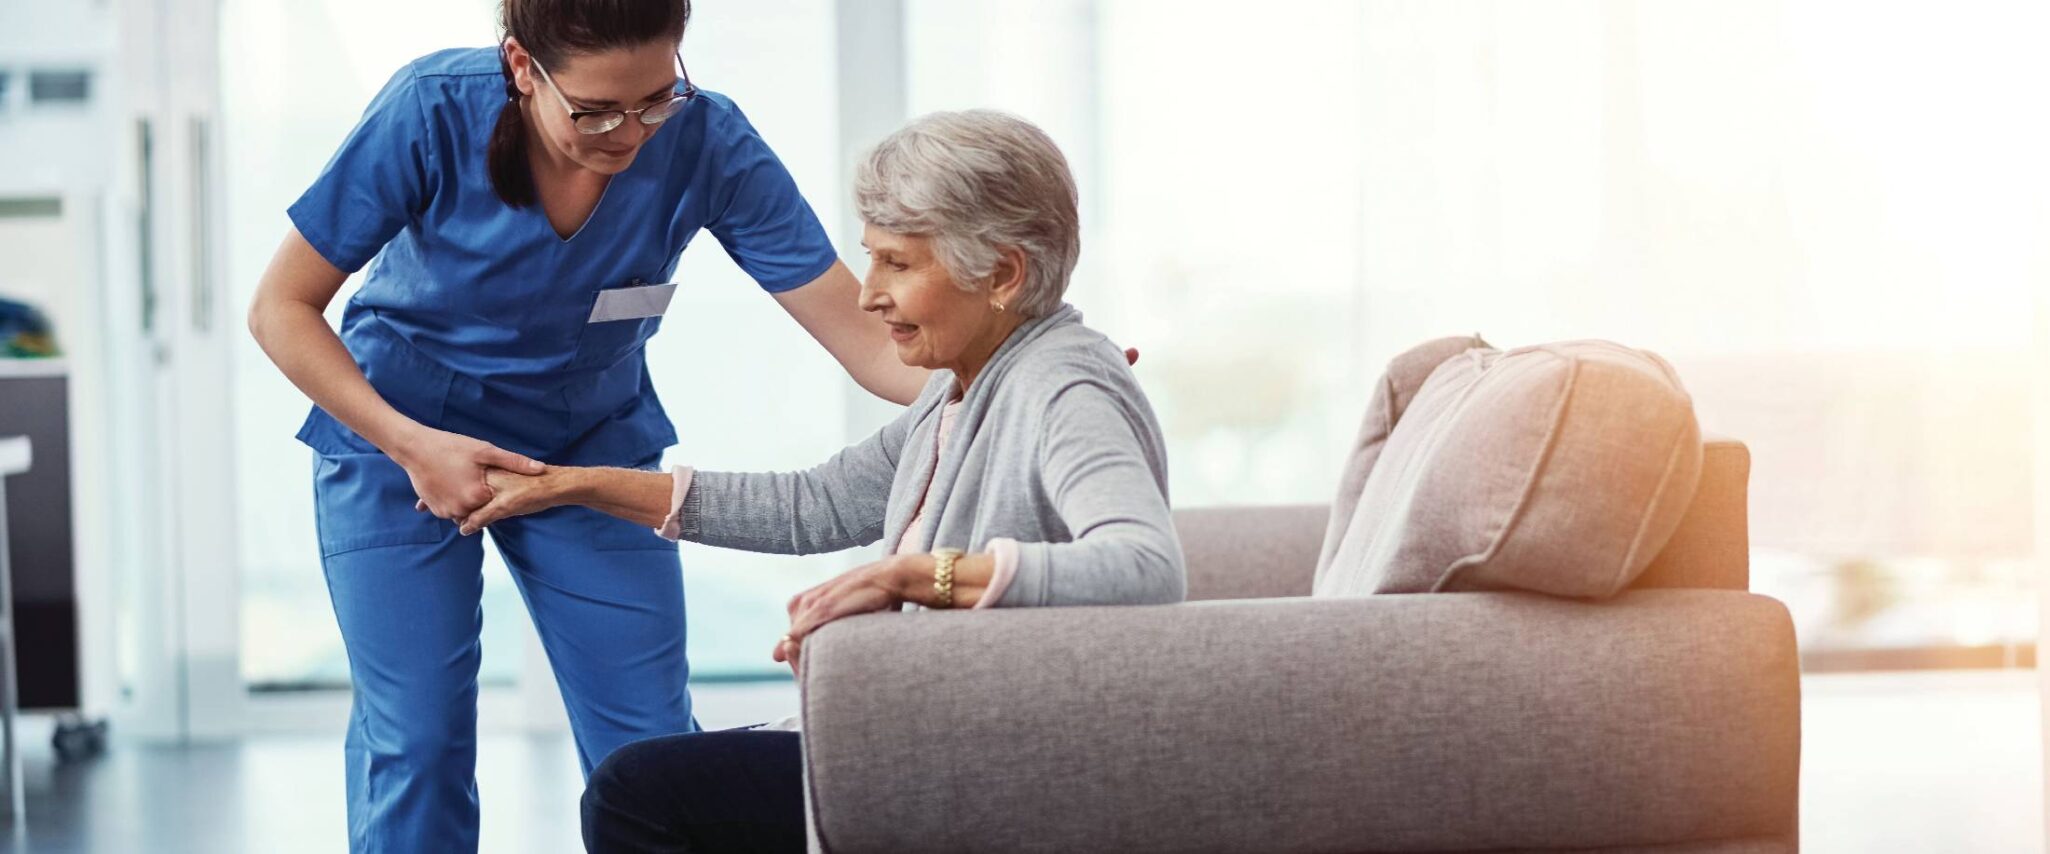 nurse helping assisted living resident get up off the couch